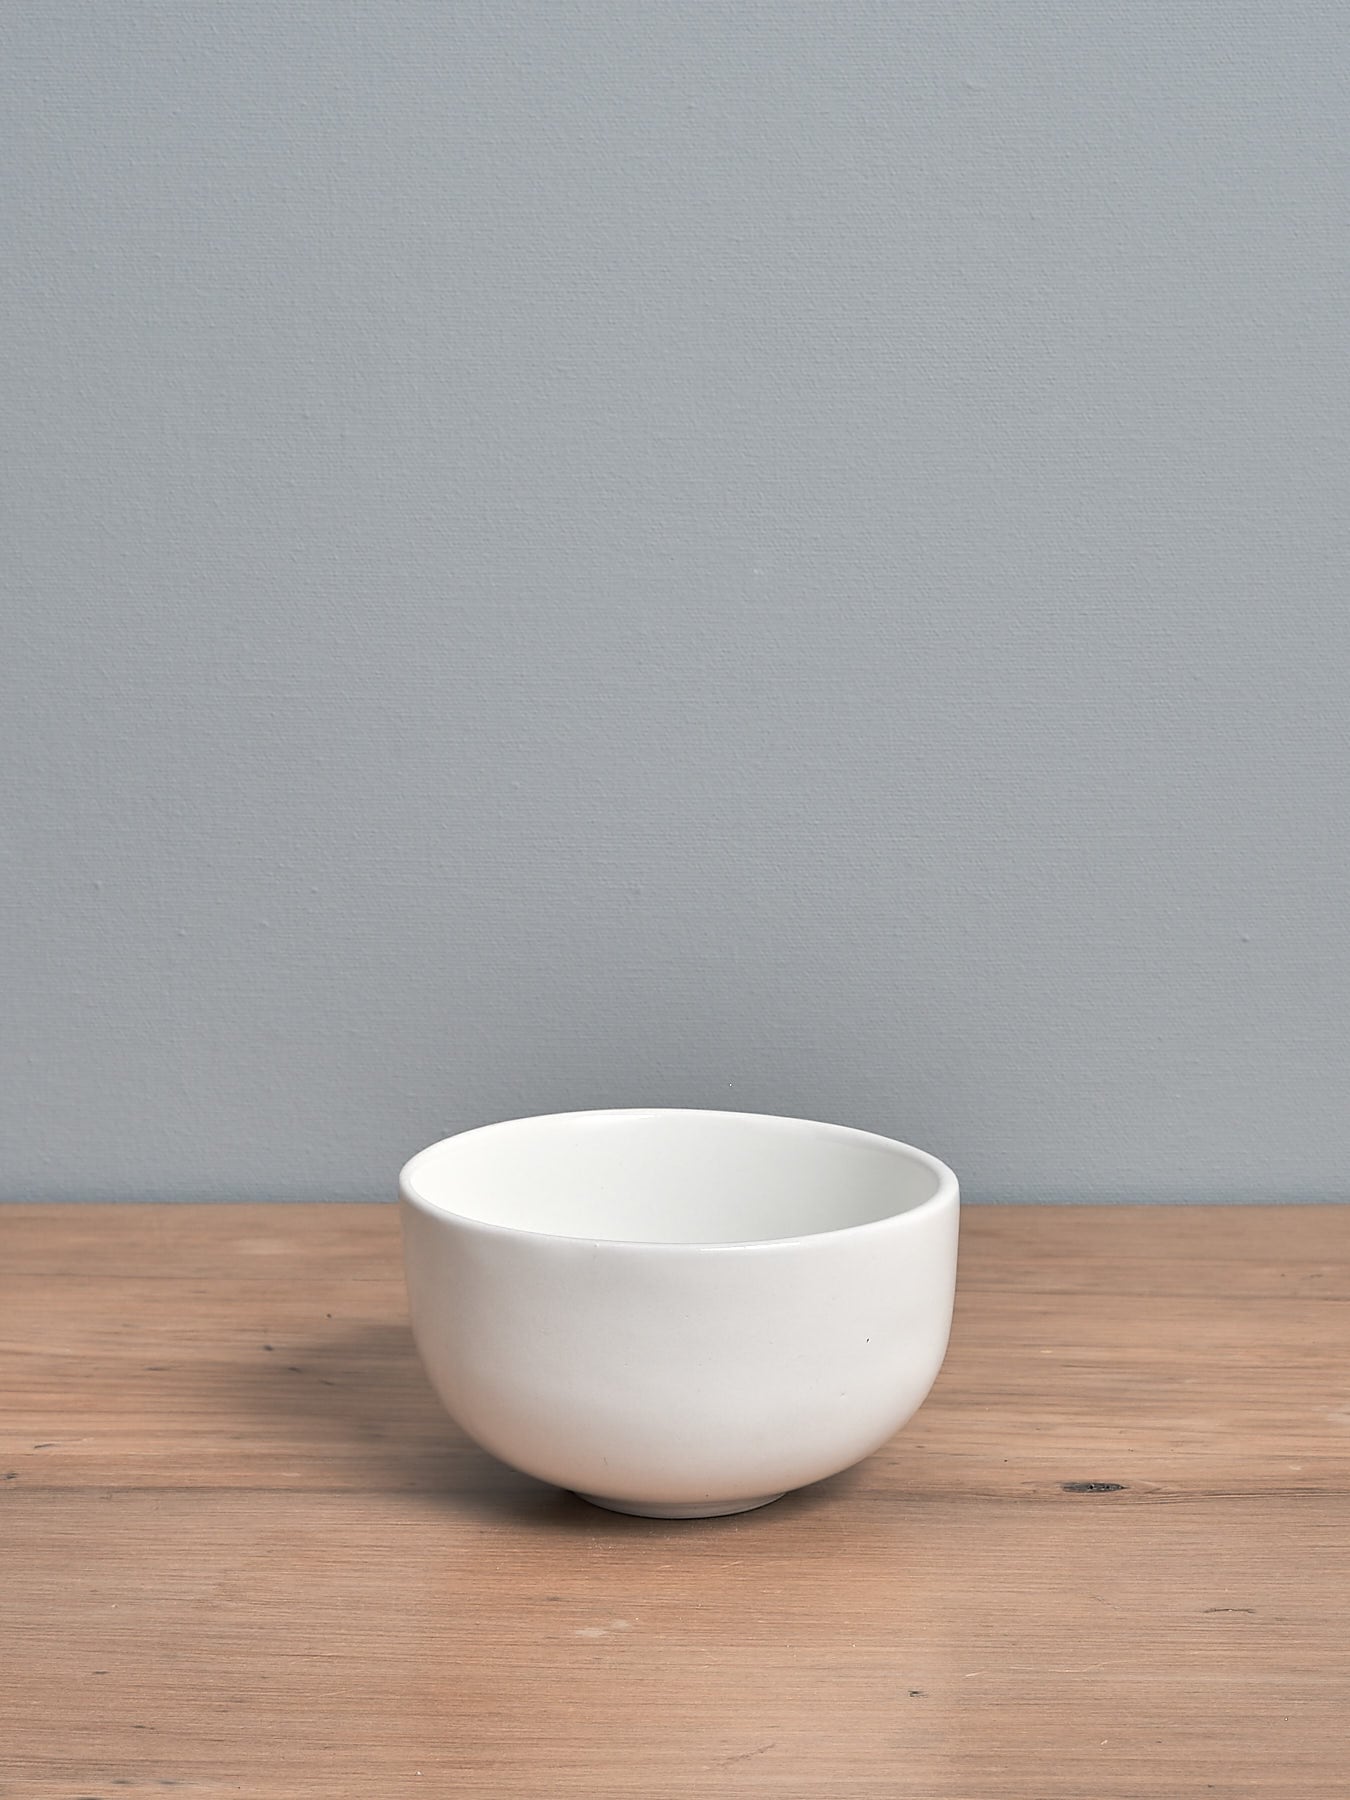 An Olive Bowl – Satin White by Gidon Bing sitting on a wooden table.